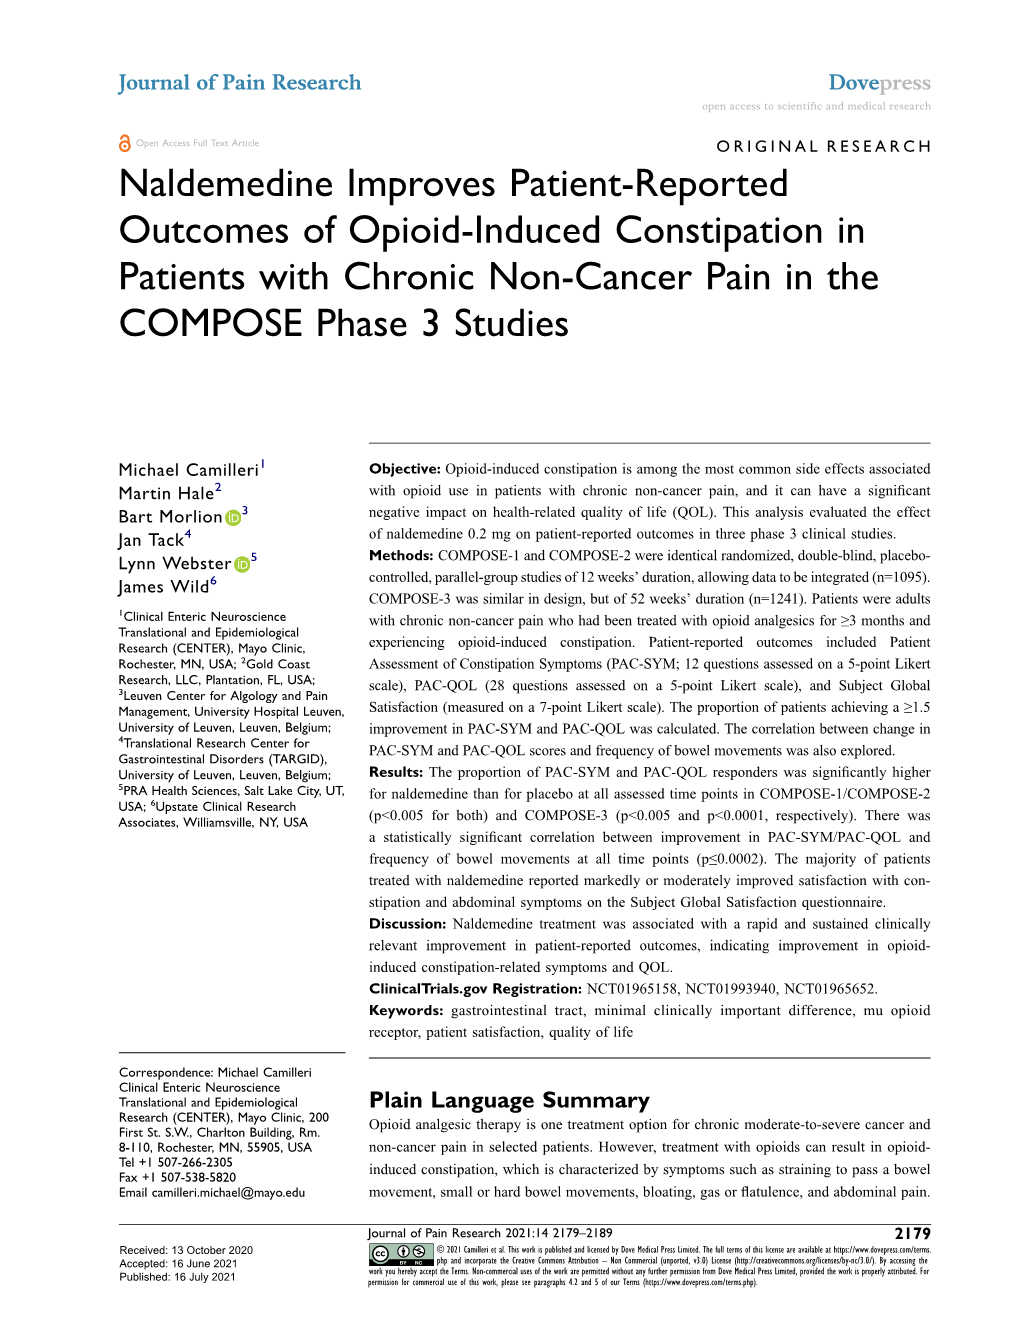 Naldemedine Improves Patient-Reported Outcomes of Opioid-Induced Constipation in Patients with Chronic Non-Cancer Pain in the COMPOSE Phase 3 Studies